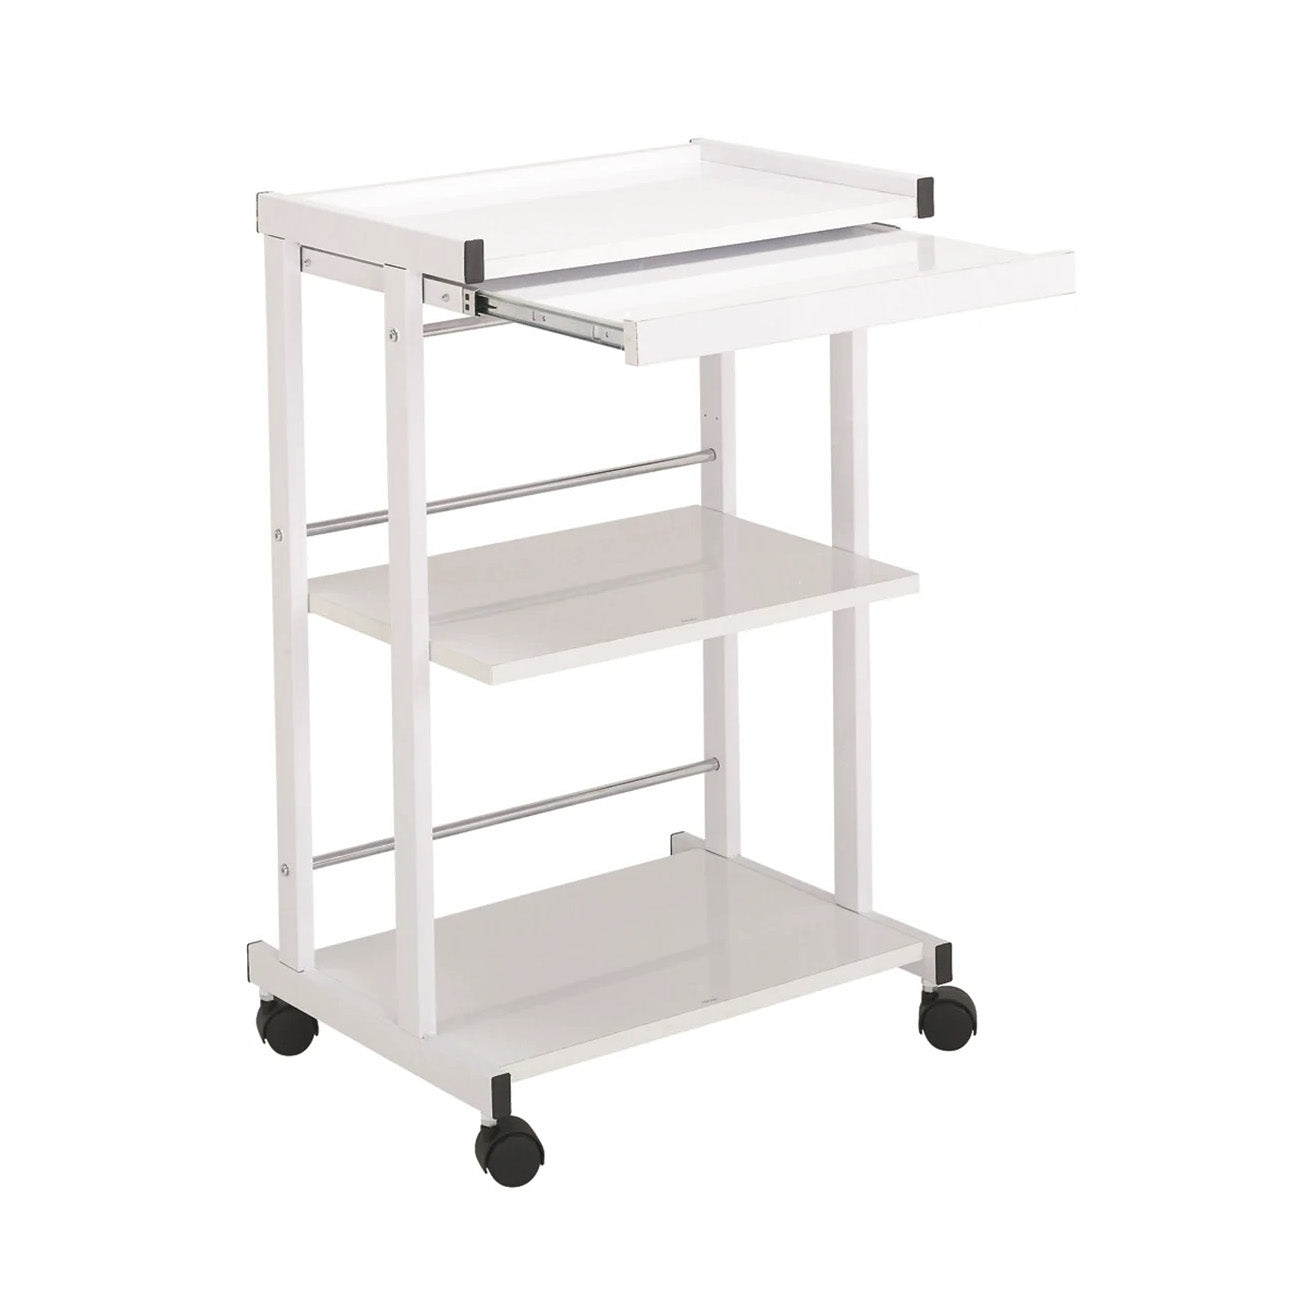 H8 Spa Utility Cart - Collins - Salon Equipment and Barber Equipment